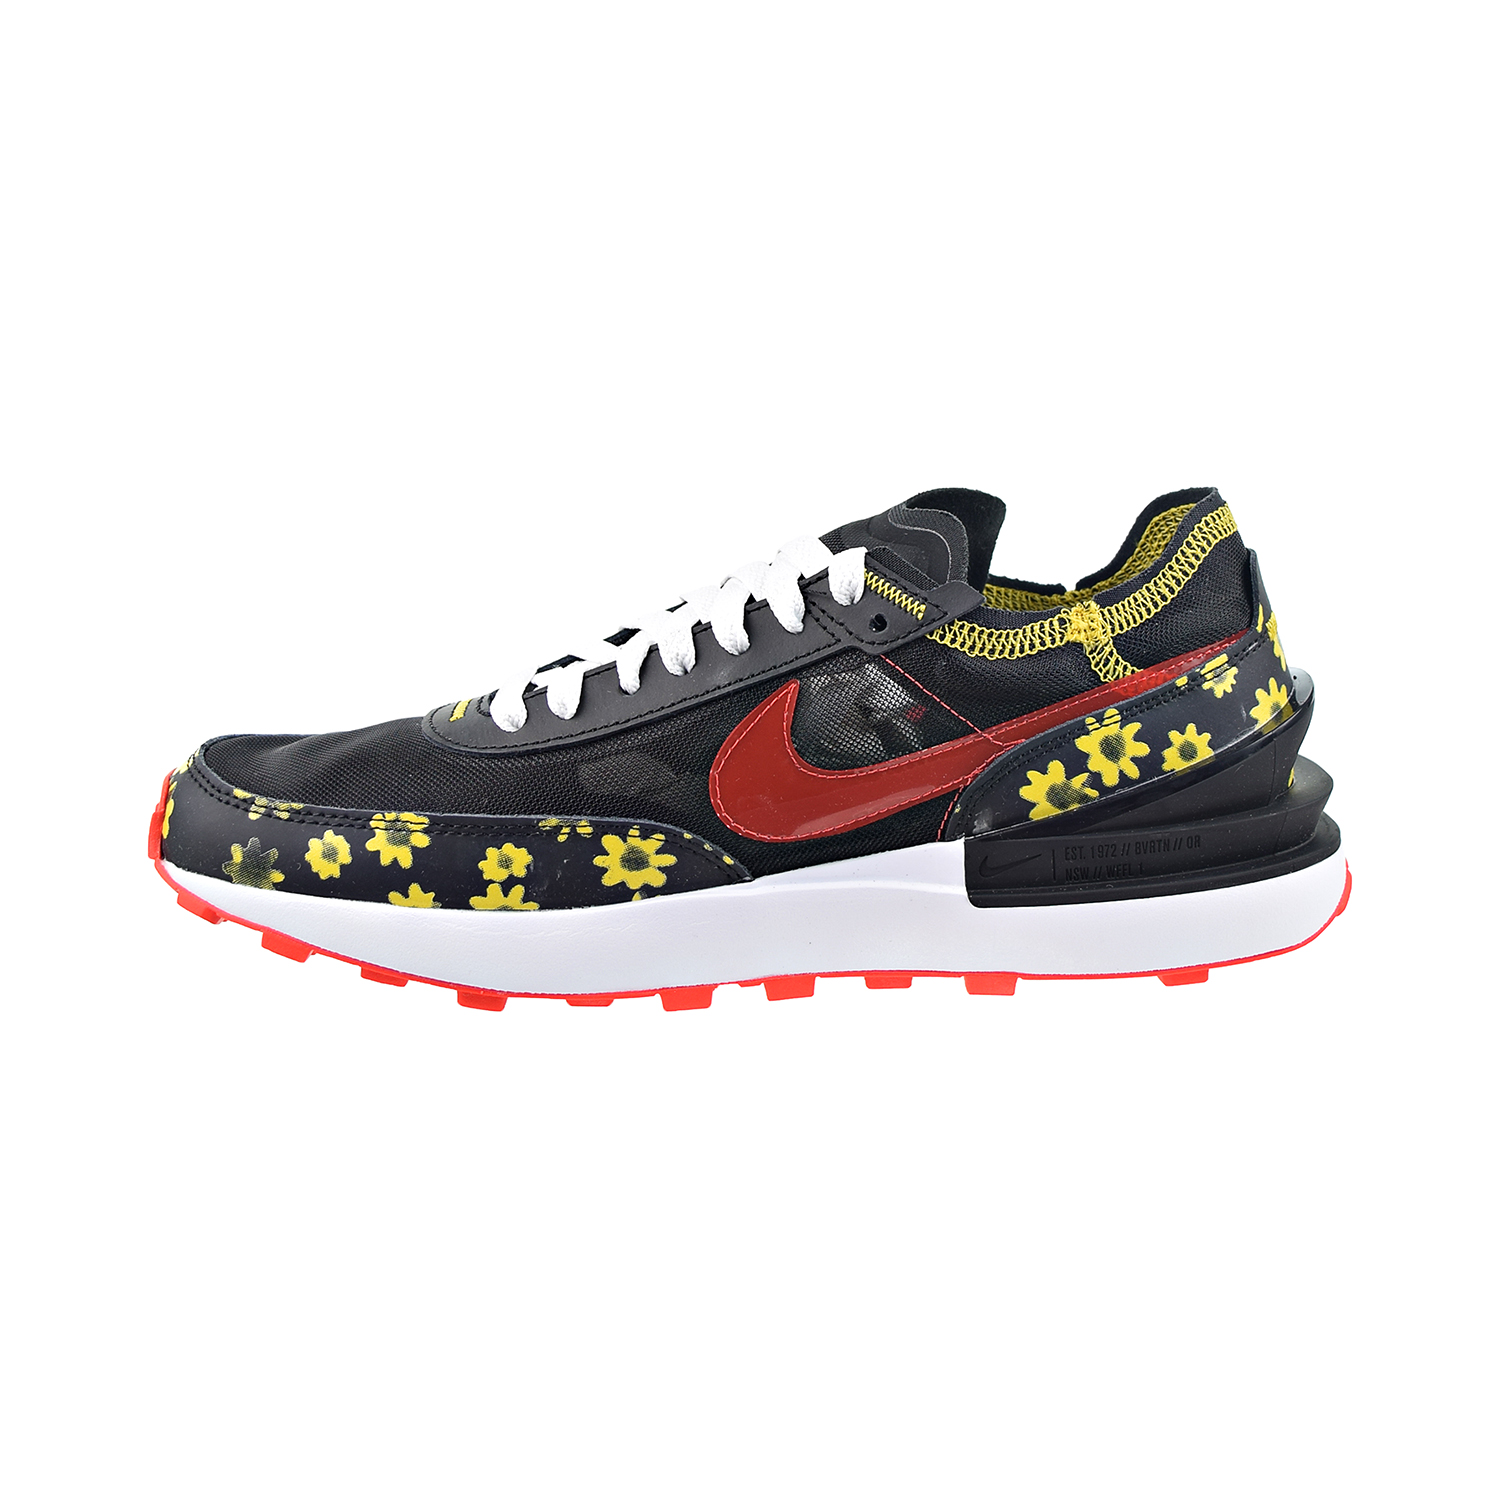 Per ongeluk Concentratie Herrie Nike Waffle One Men's Shoes Black-Habanero Red-Vivid Sulfur-Floral  dq7637-001